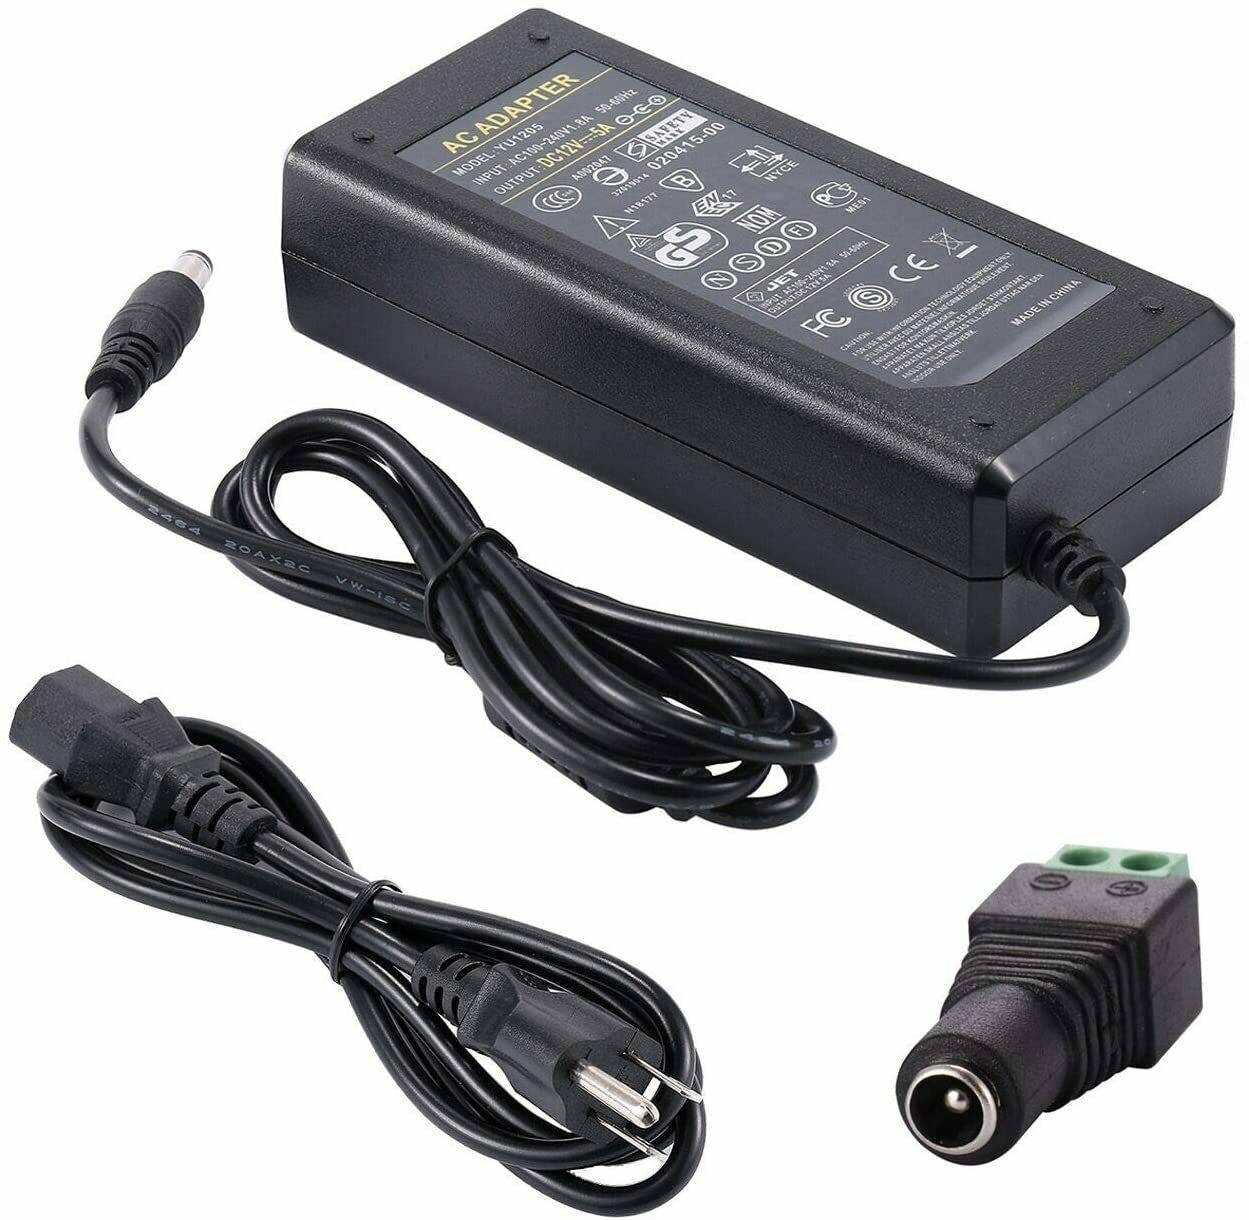 *Brand NEW* AC DC 12V 5A Power Supply Adapter Transformer Charger for LED Strip CCTV DVR